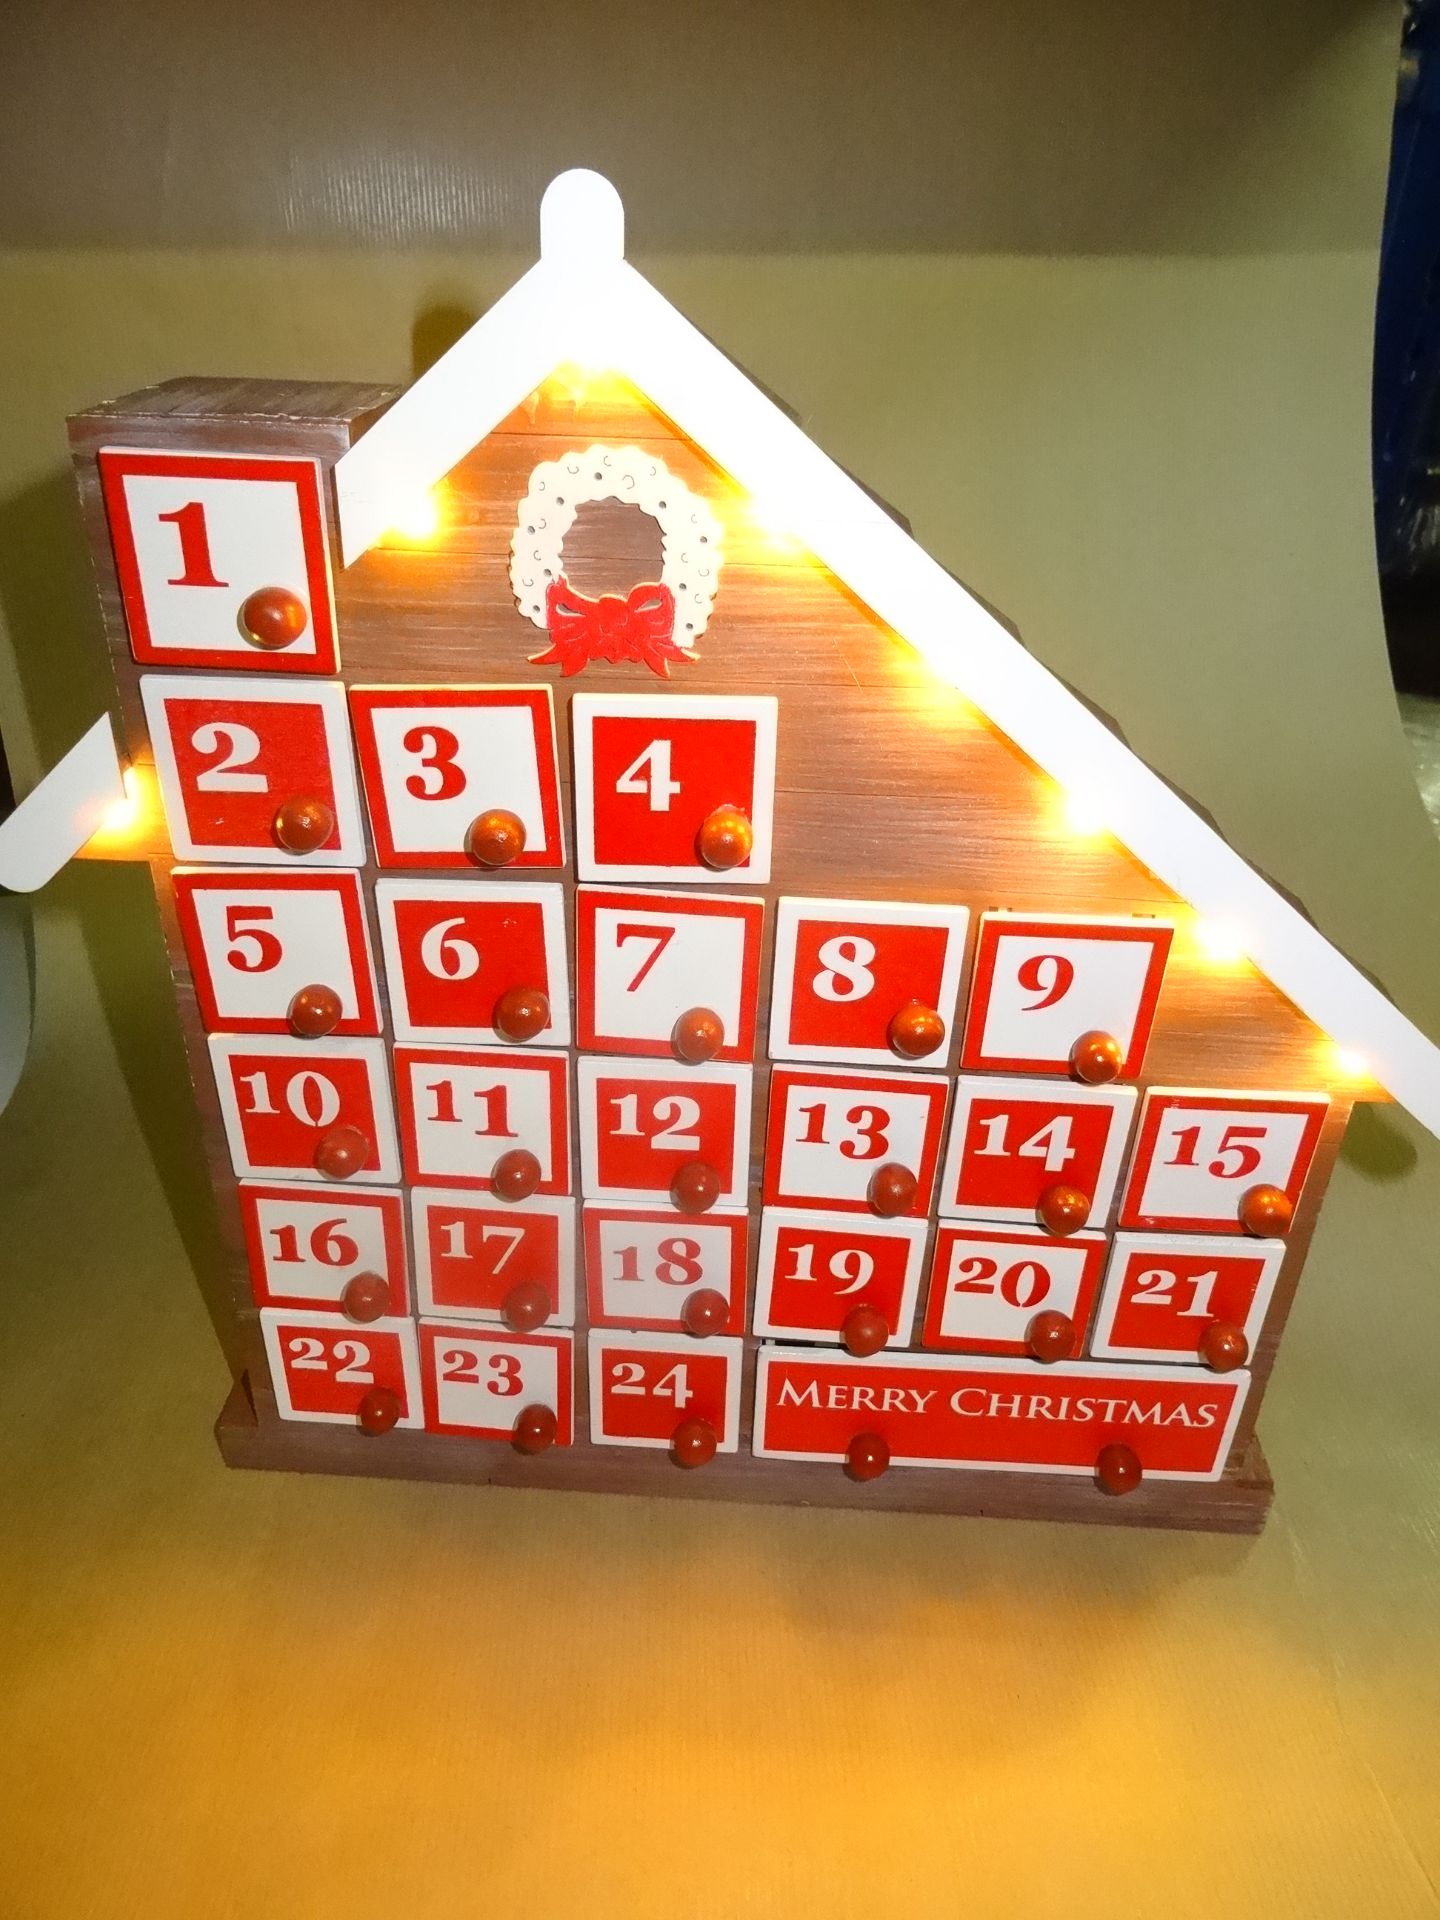 6 x The Christmas Workshop LED Light Up Wooden Advent Calender. Count down the days to christmas